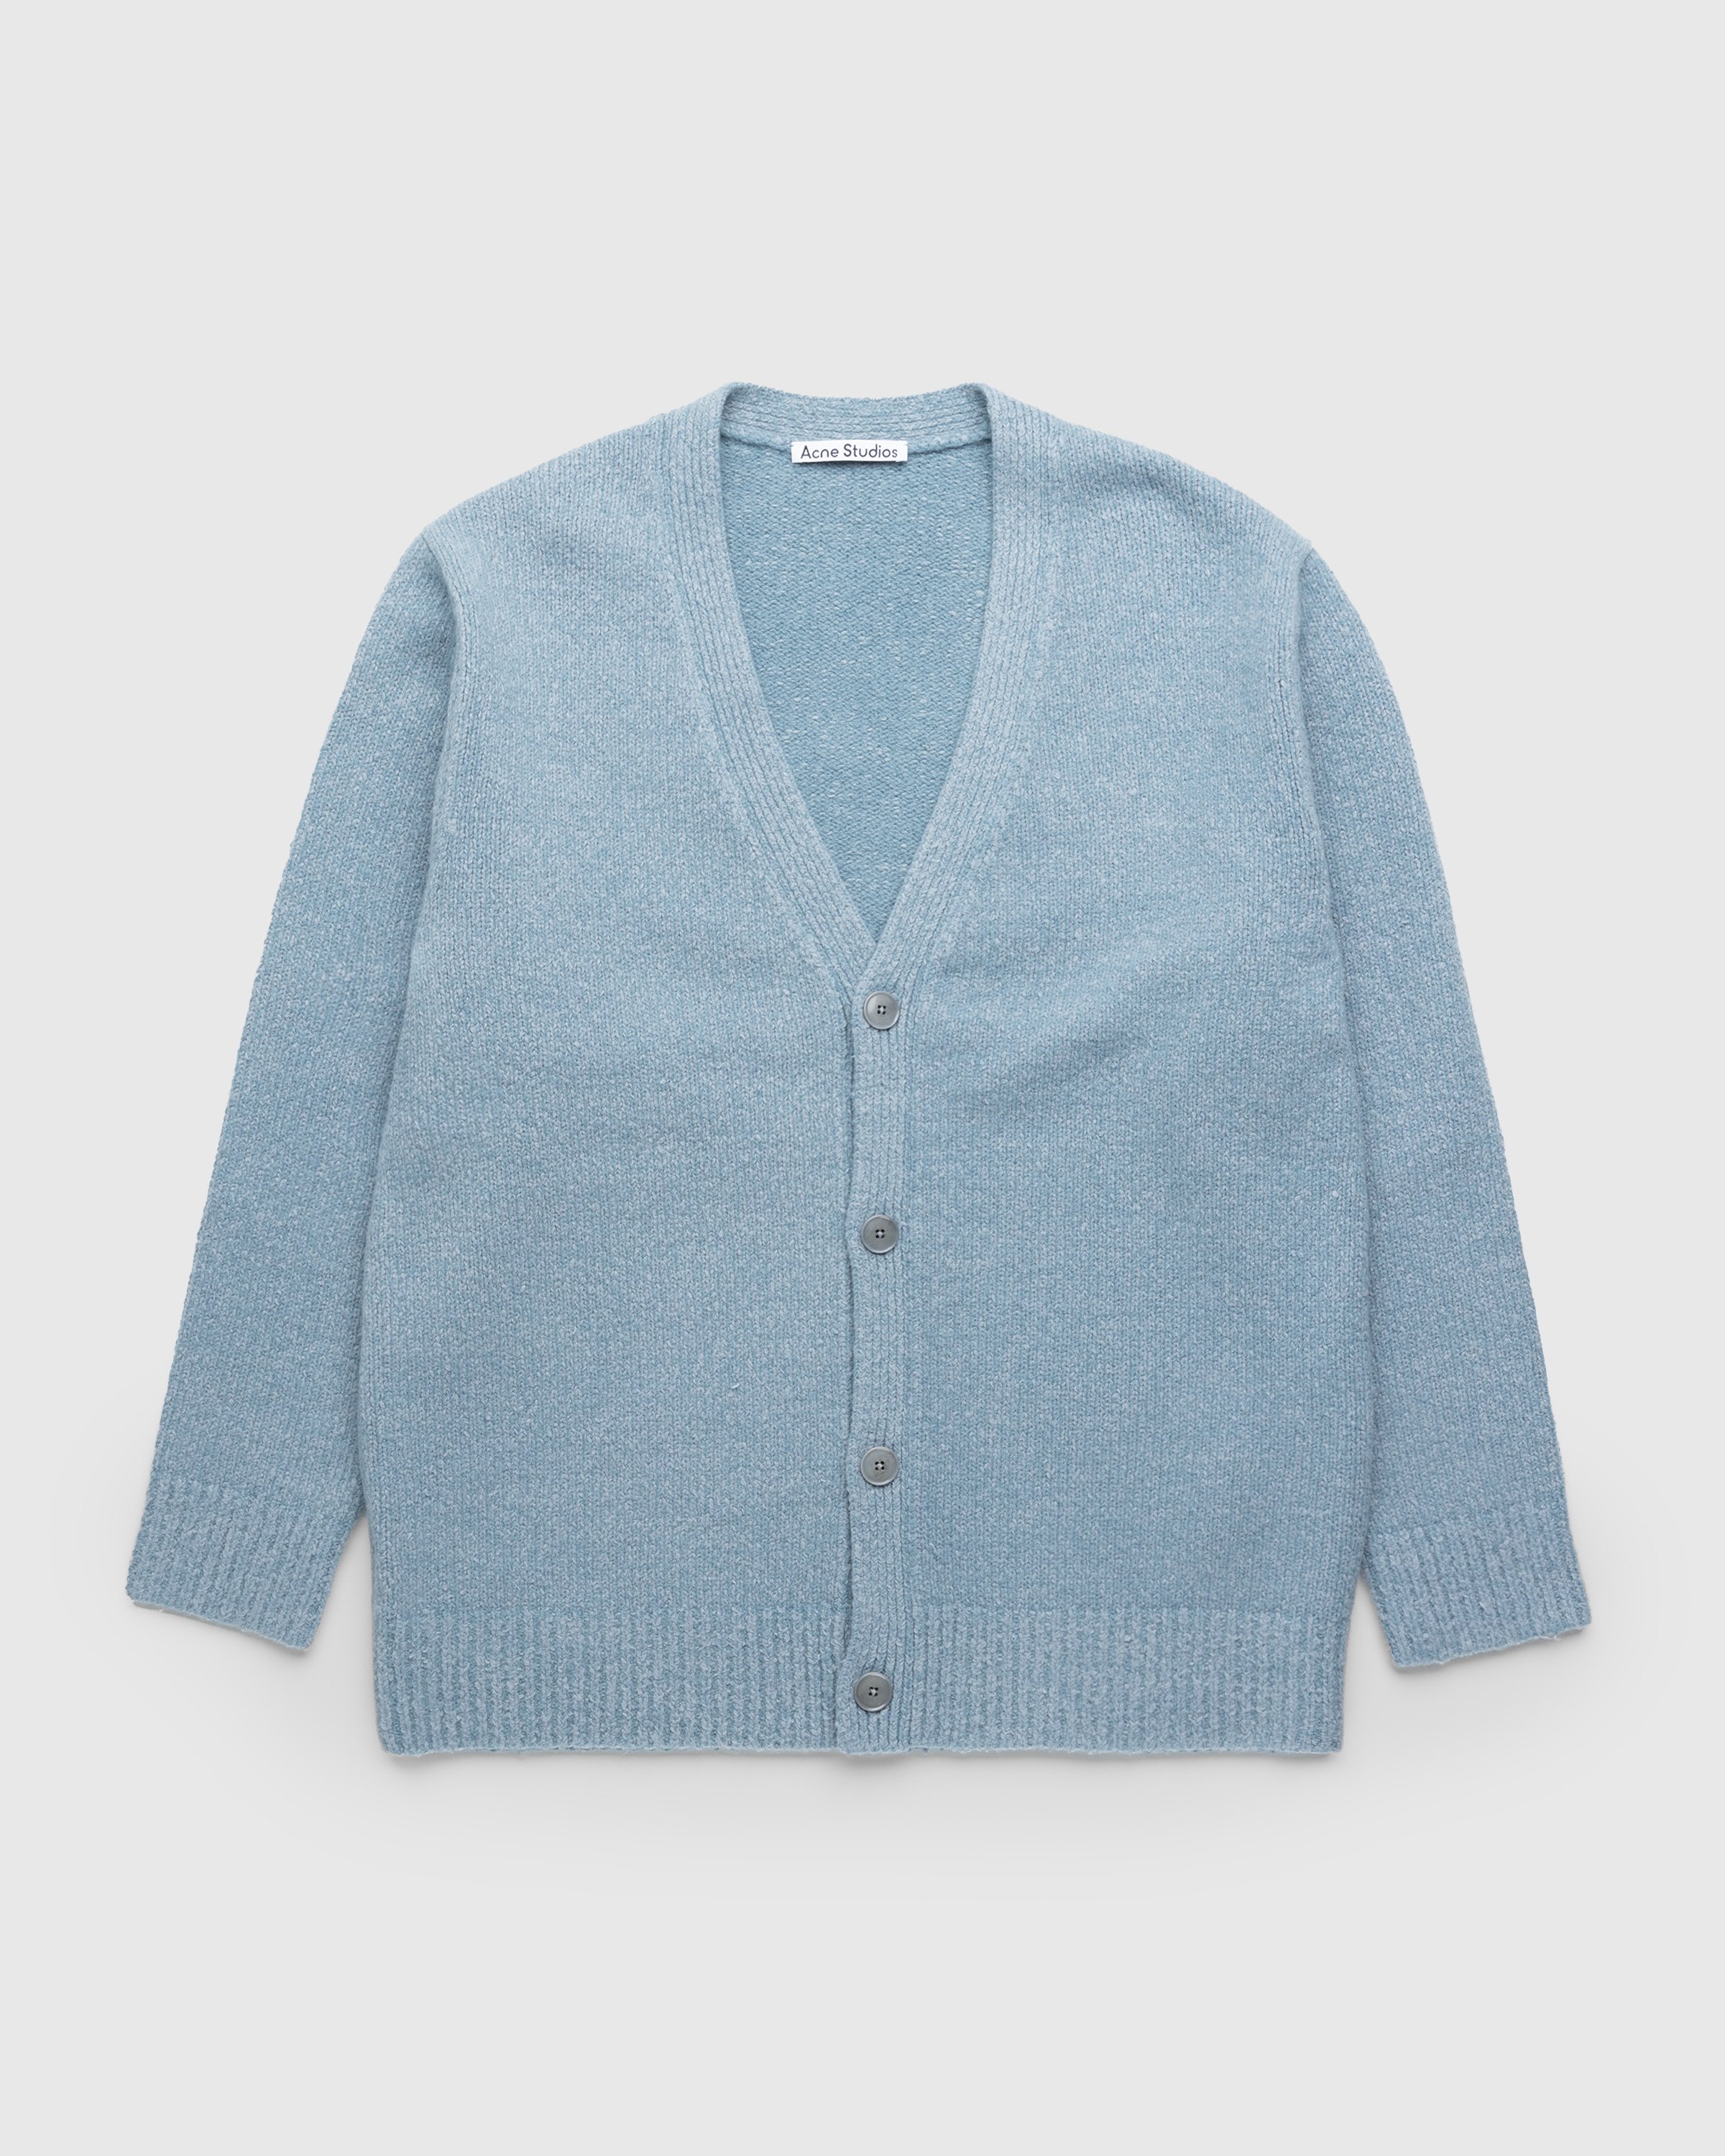 Acne Studios - FN-MN-KNIT000440 - Clothing - Blue - Image 1